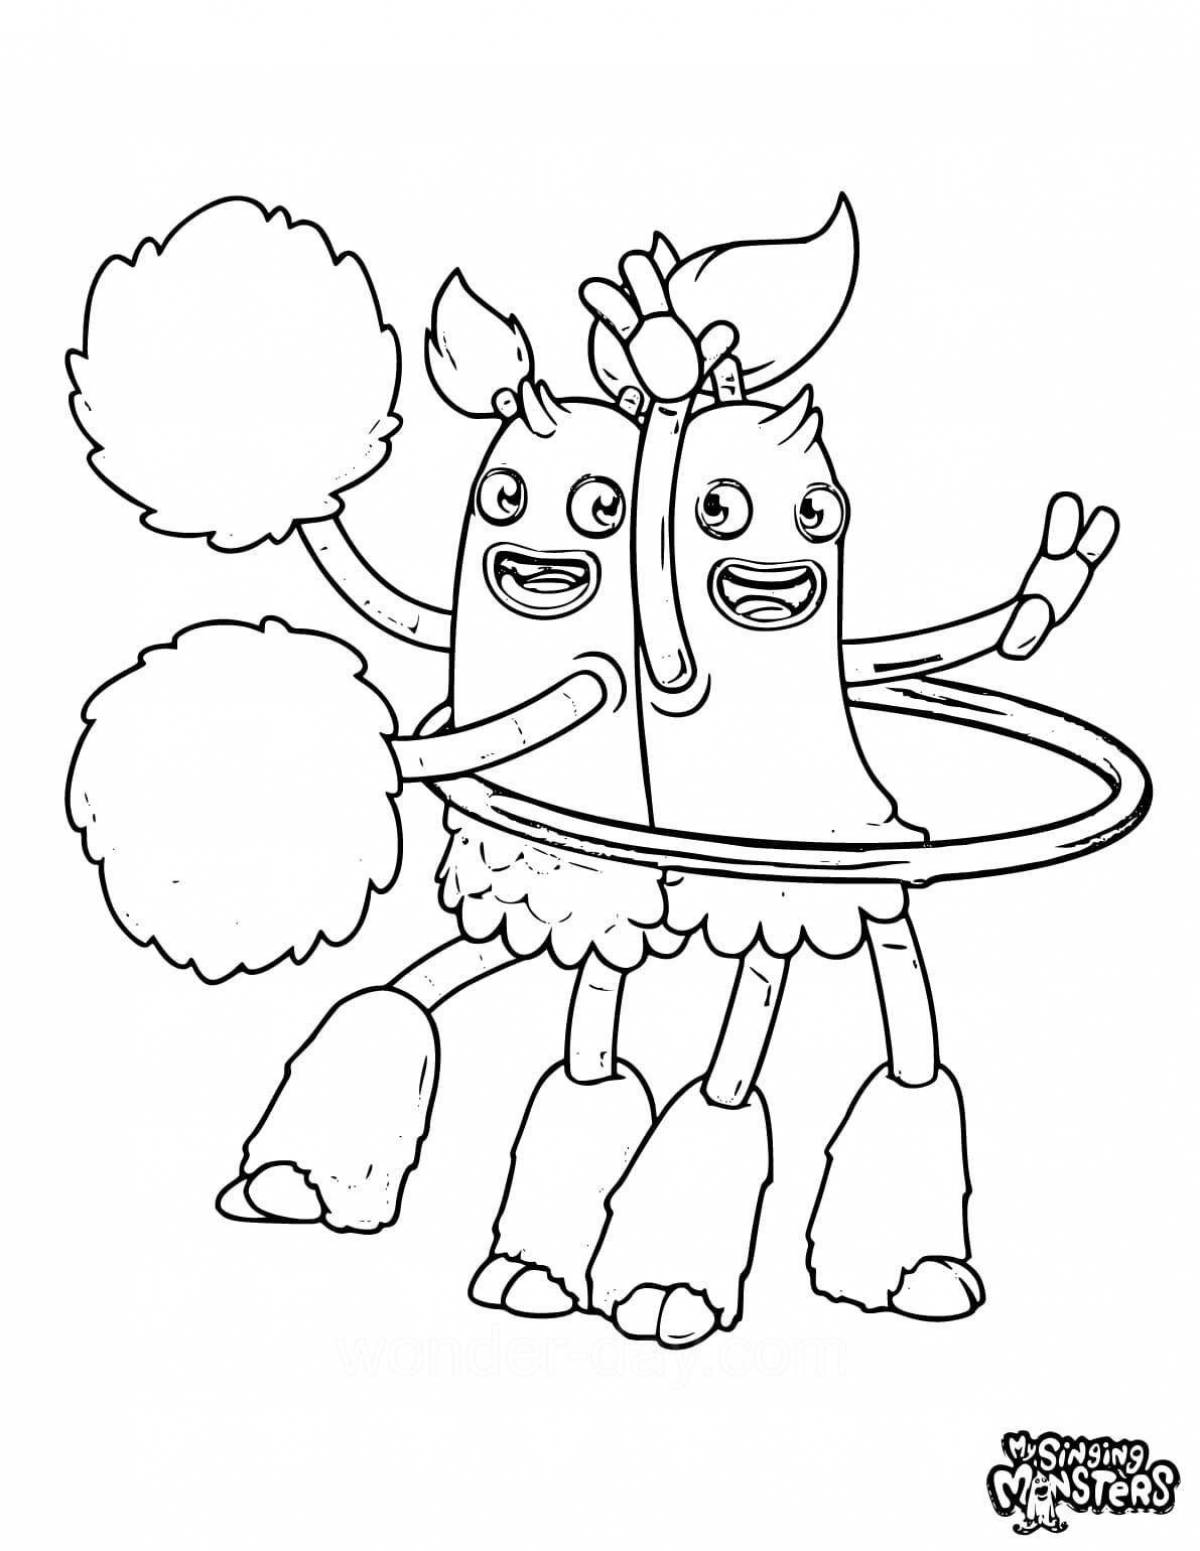 Dazzling mai singing monster coloring page